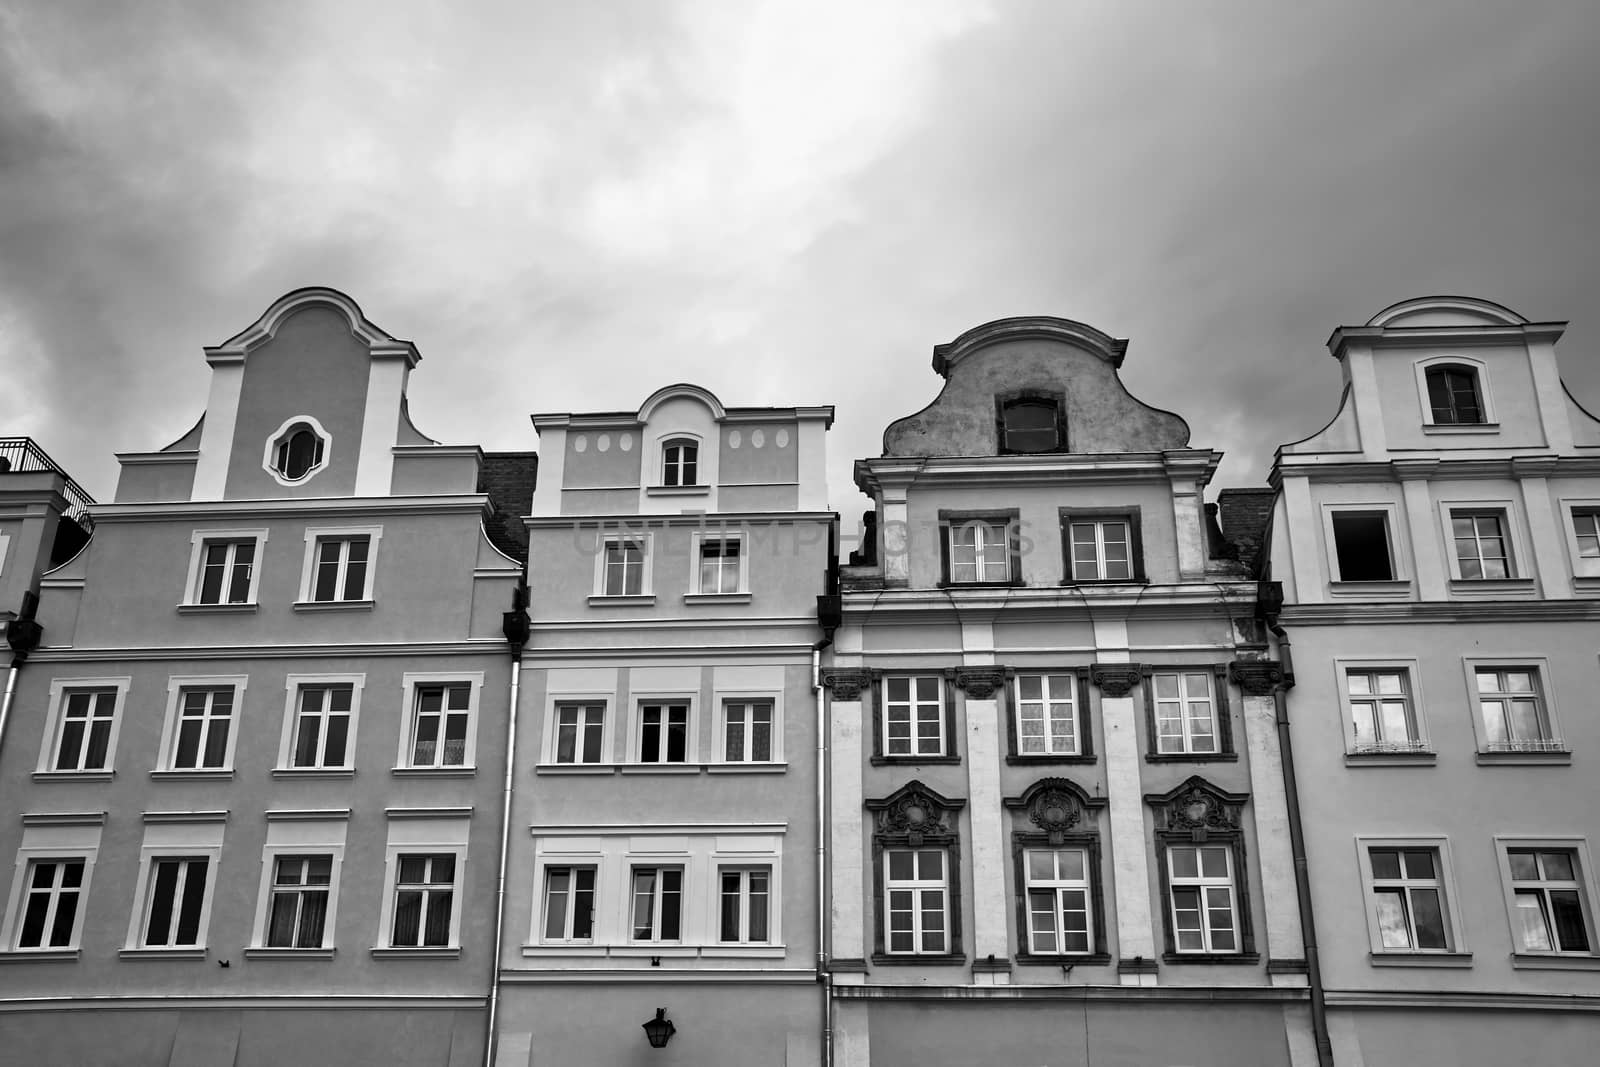 Facades of historic tenement houses on the market square in Jelenia Gora in Poland, black and white